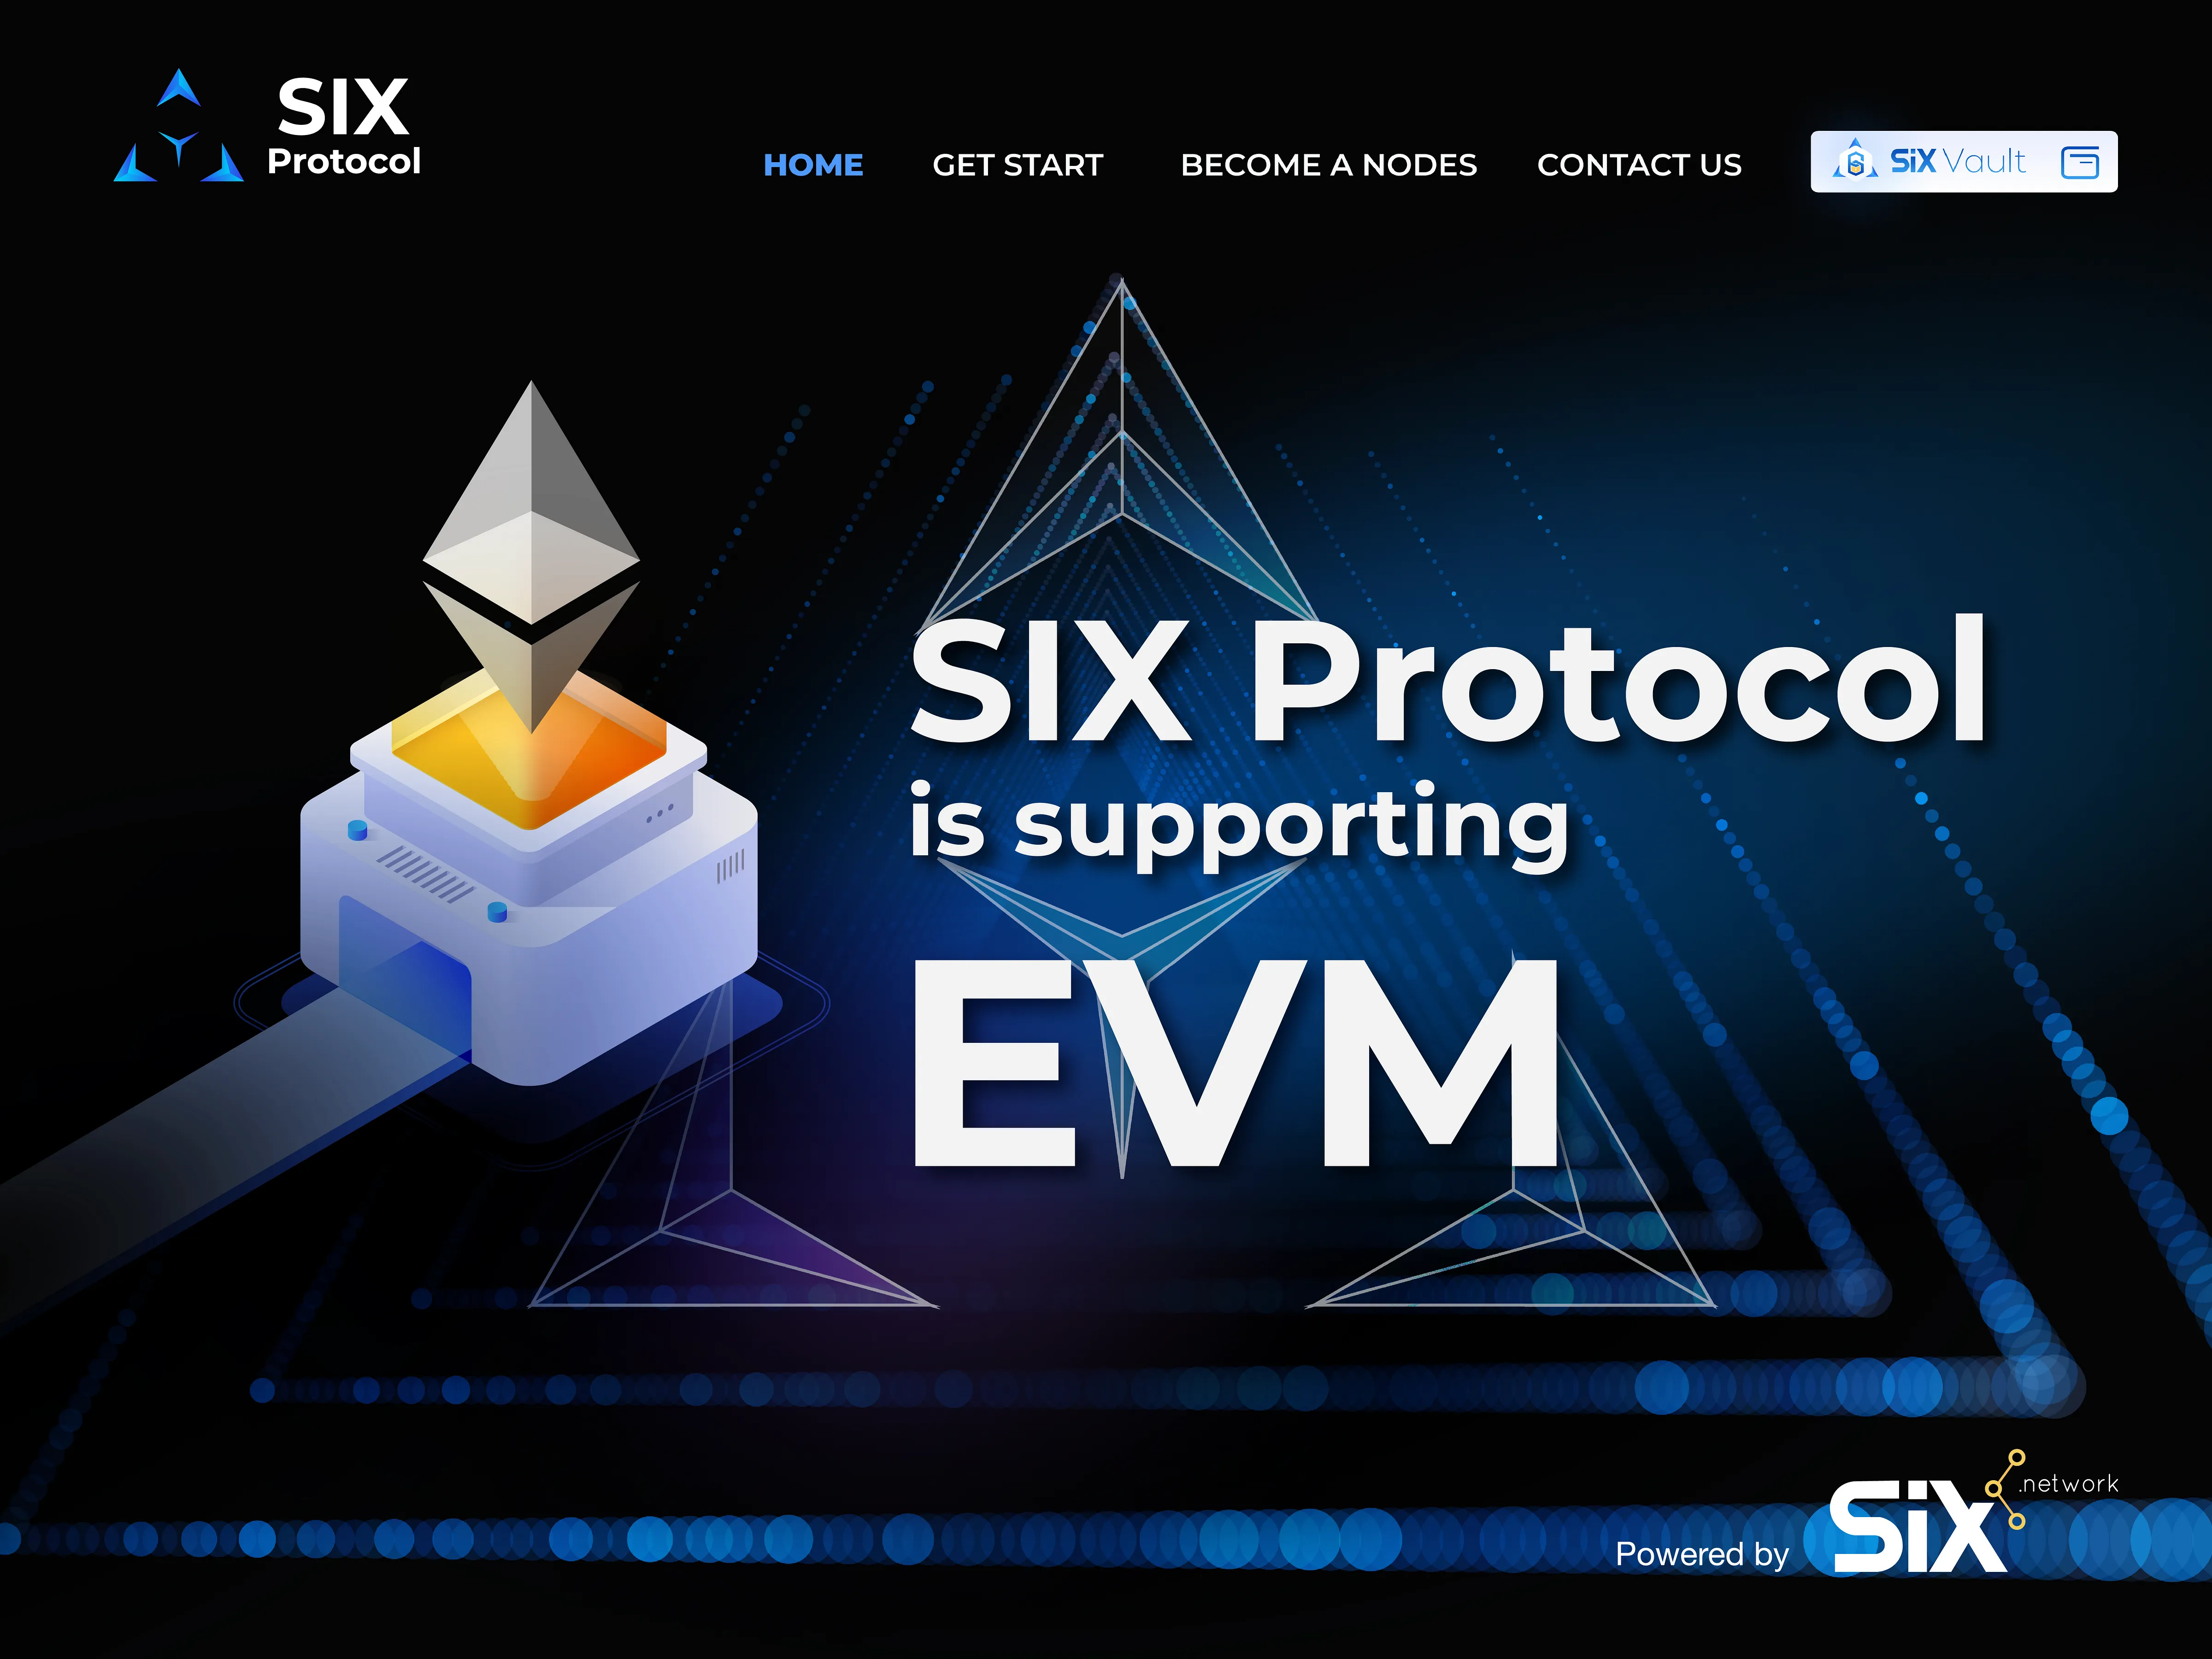 SIX Protocol is supporting EVM